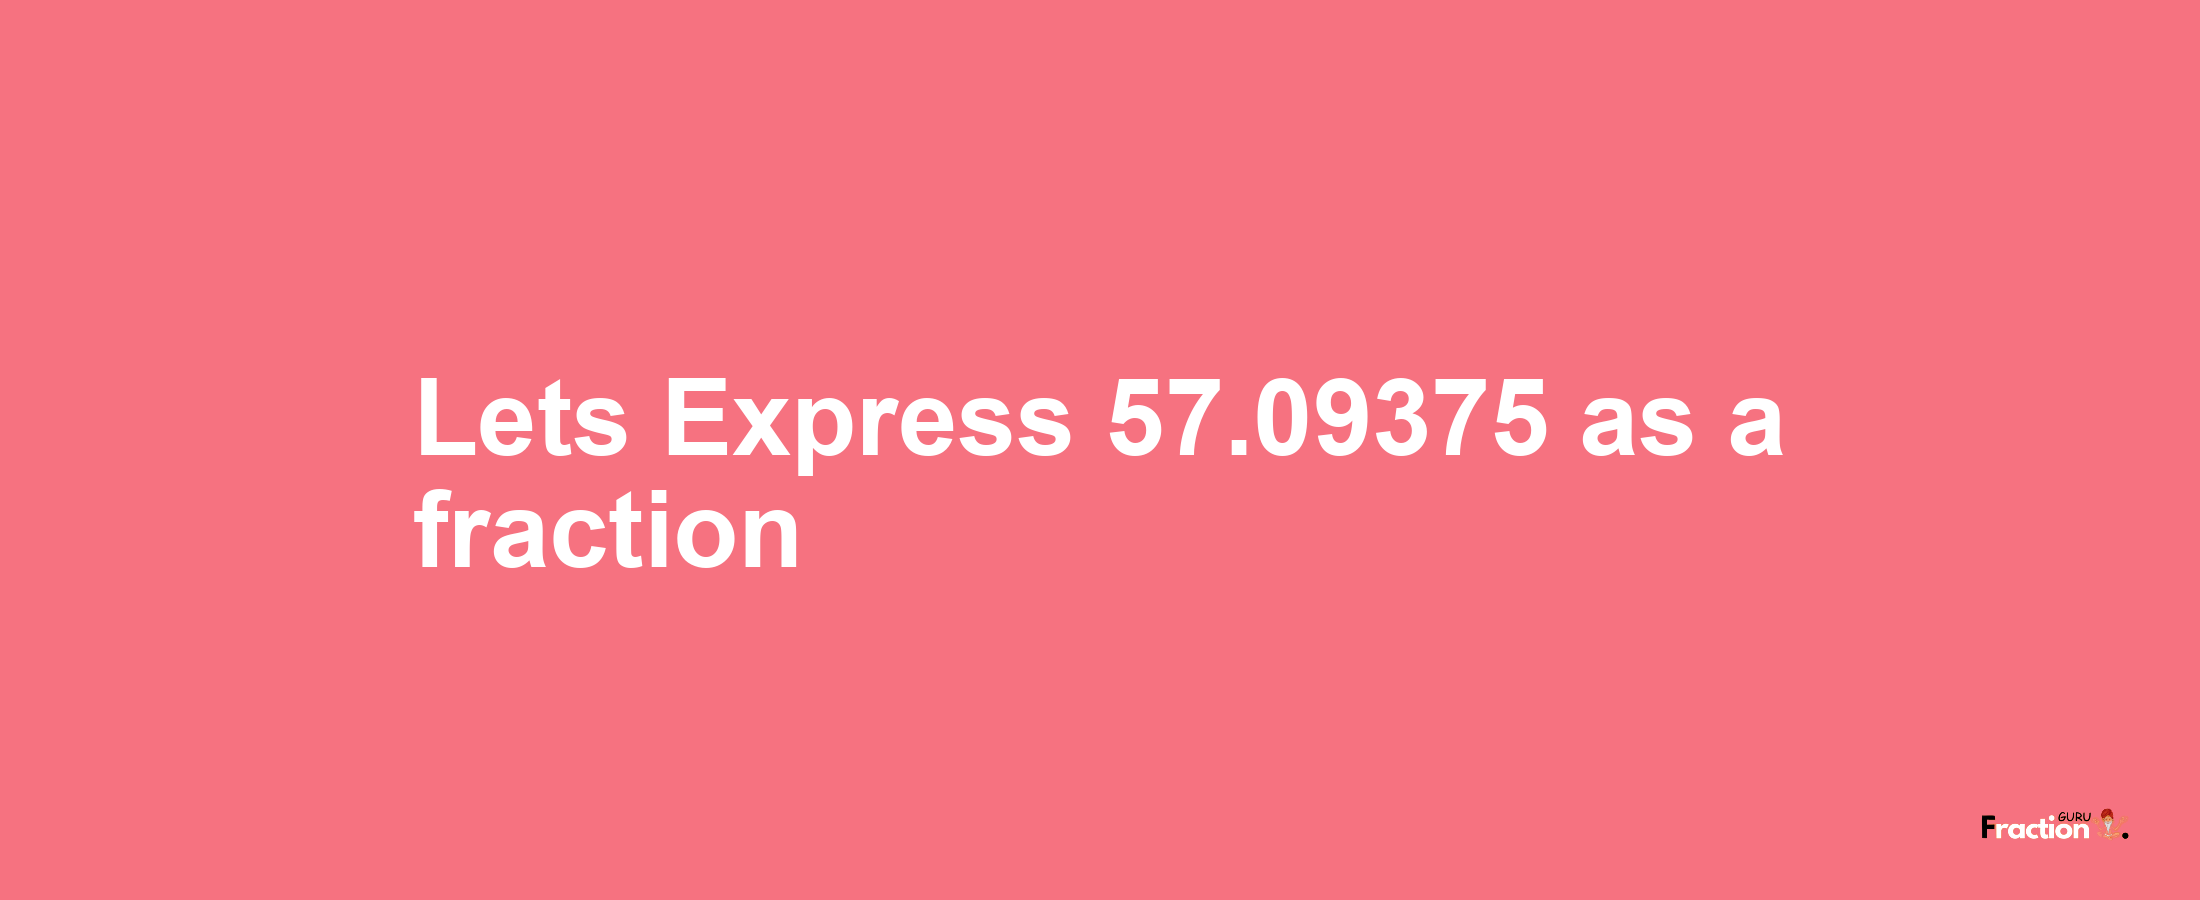 Lets Express 57.09375 as afraction